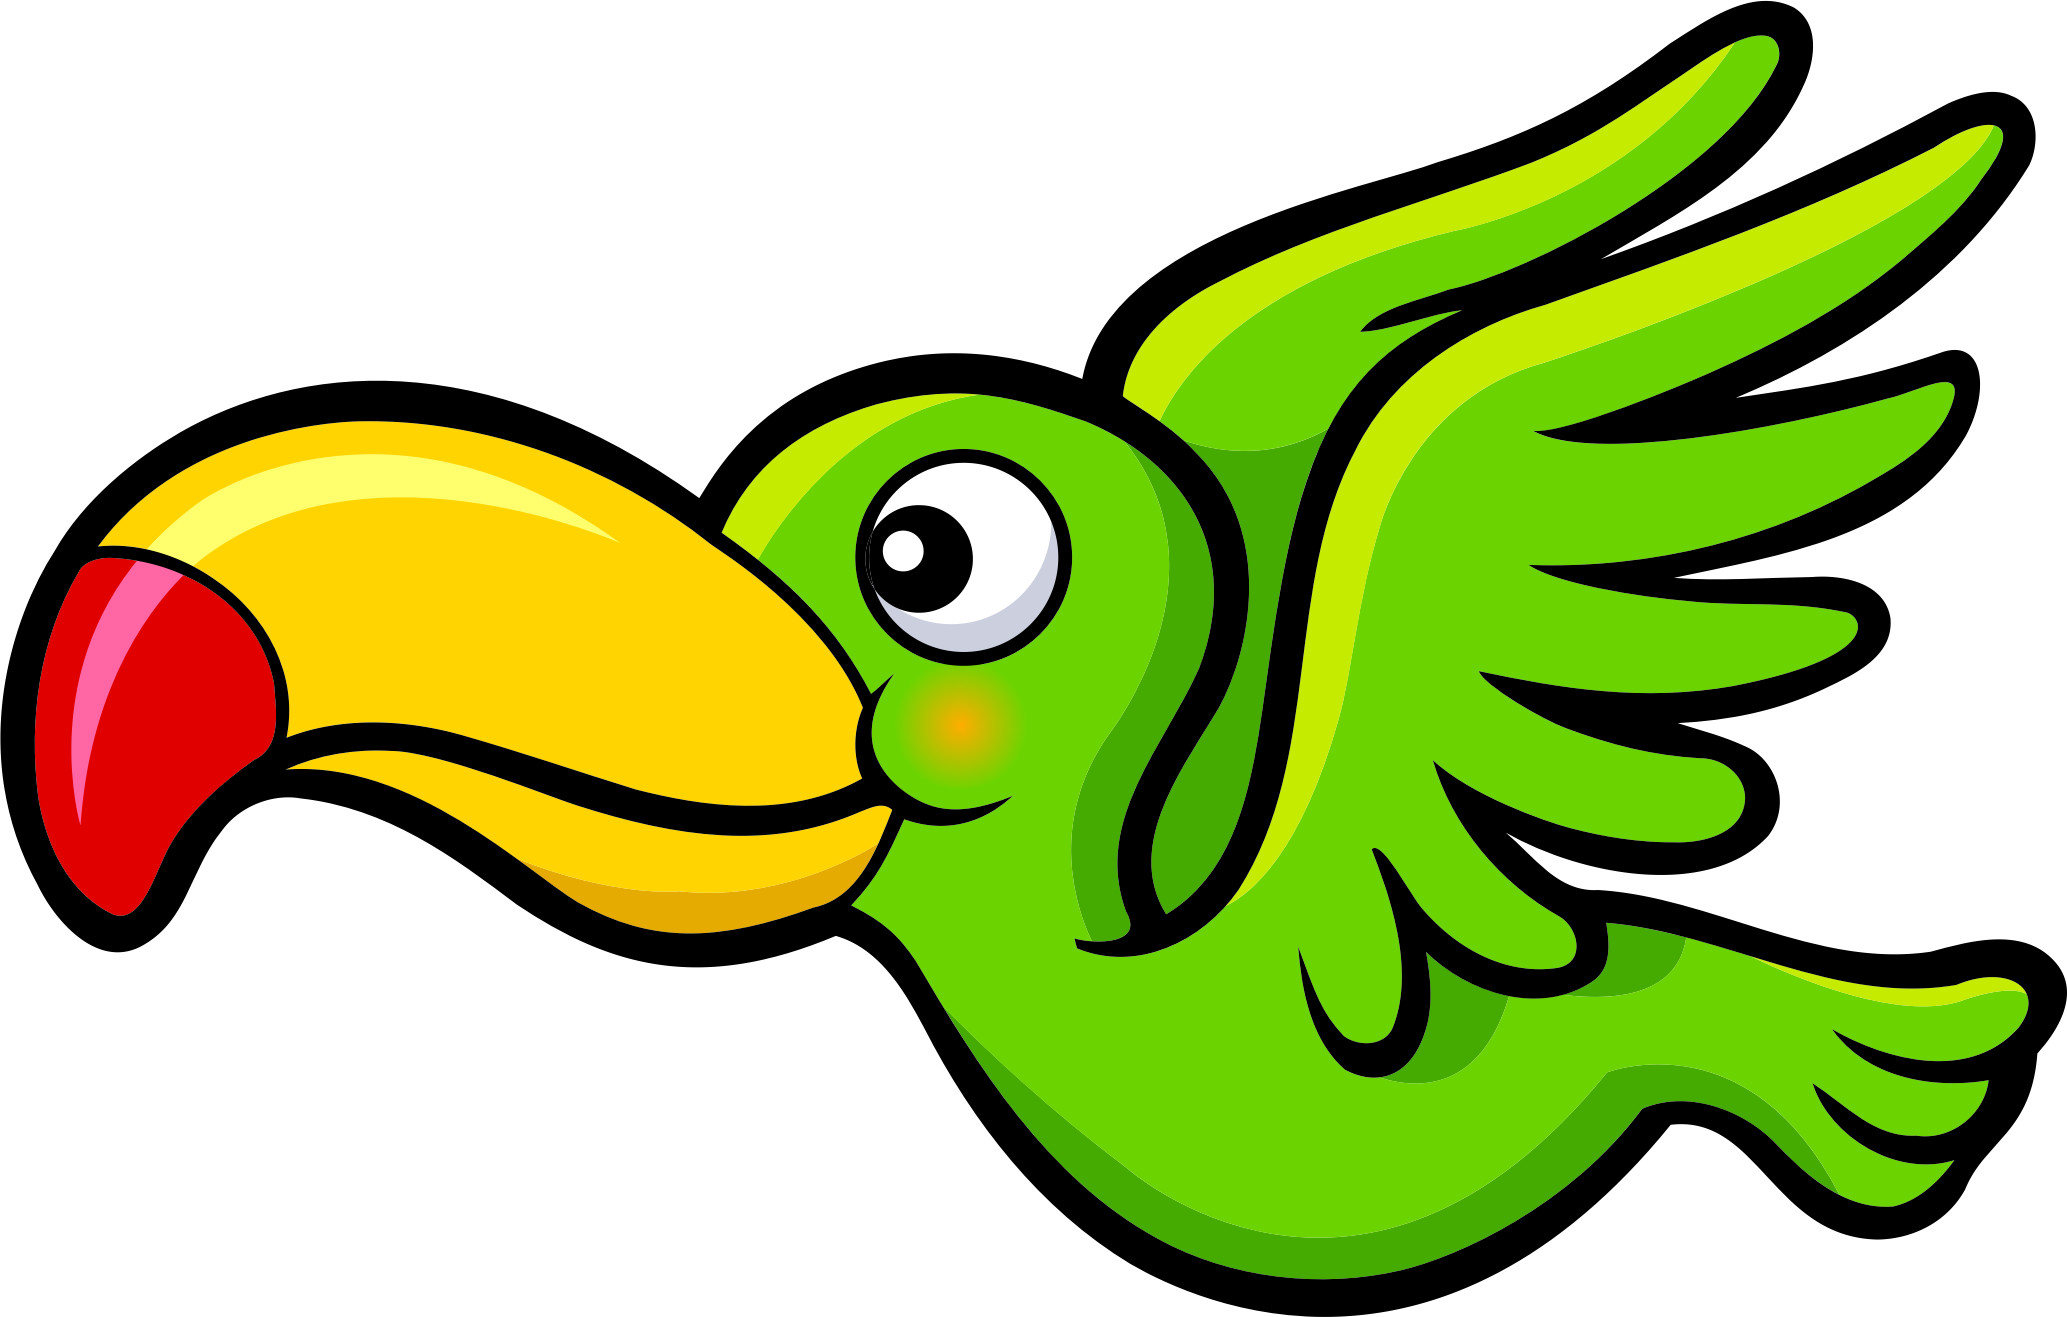 Flying big image png. Bird clipart animated